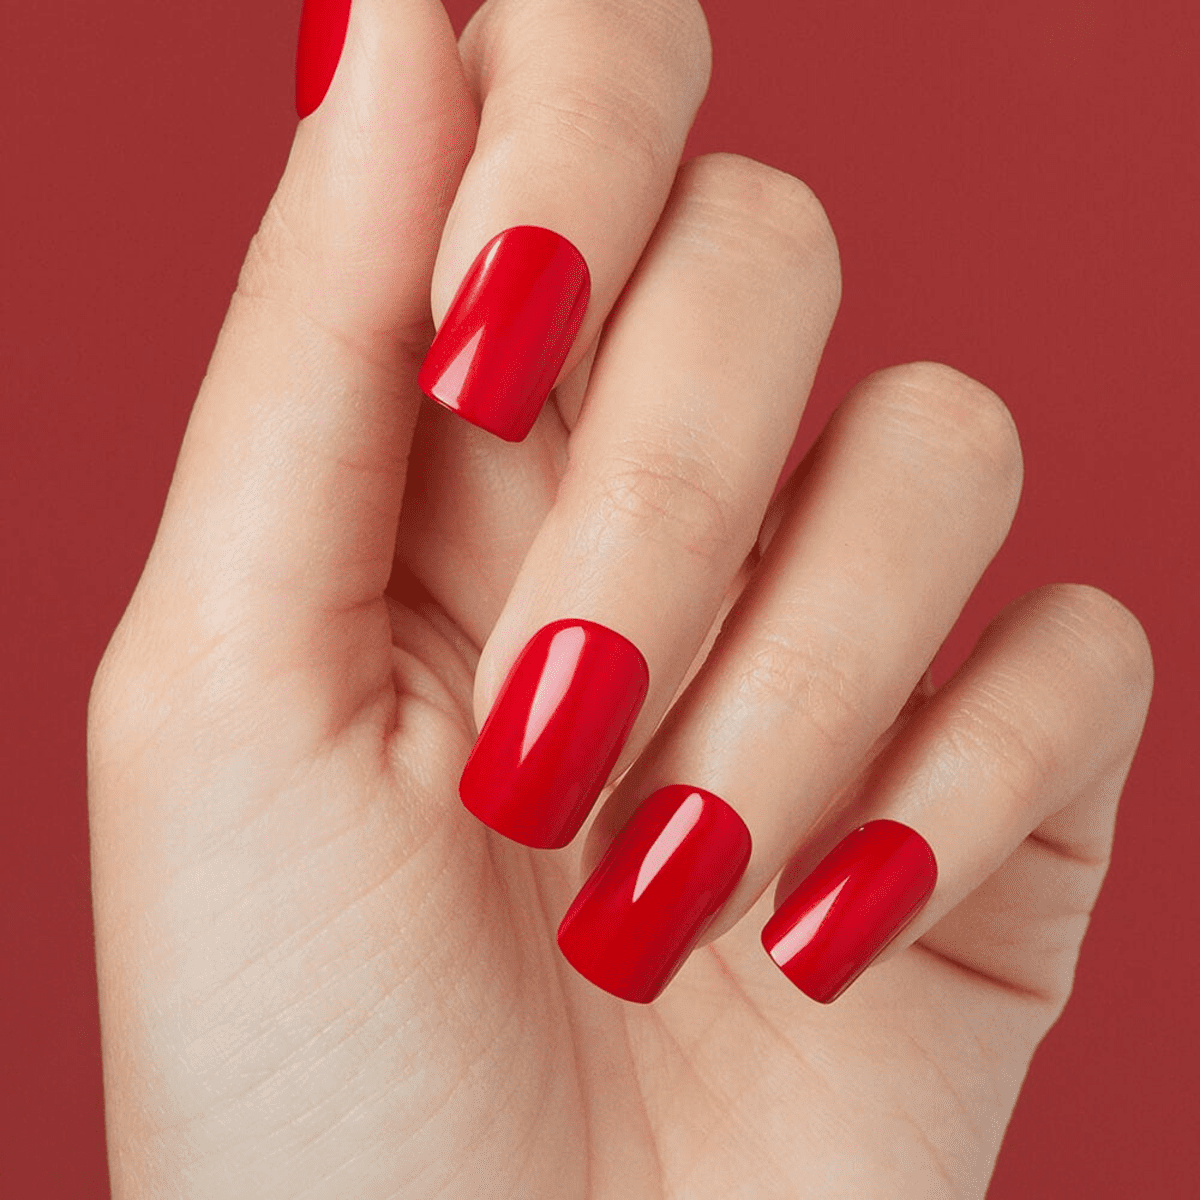 imPRESS Color Press-On Manicure - Reddy or Not